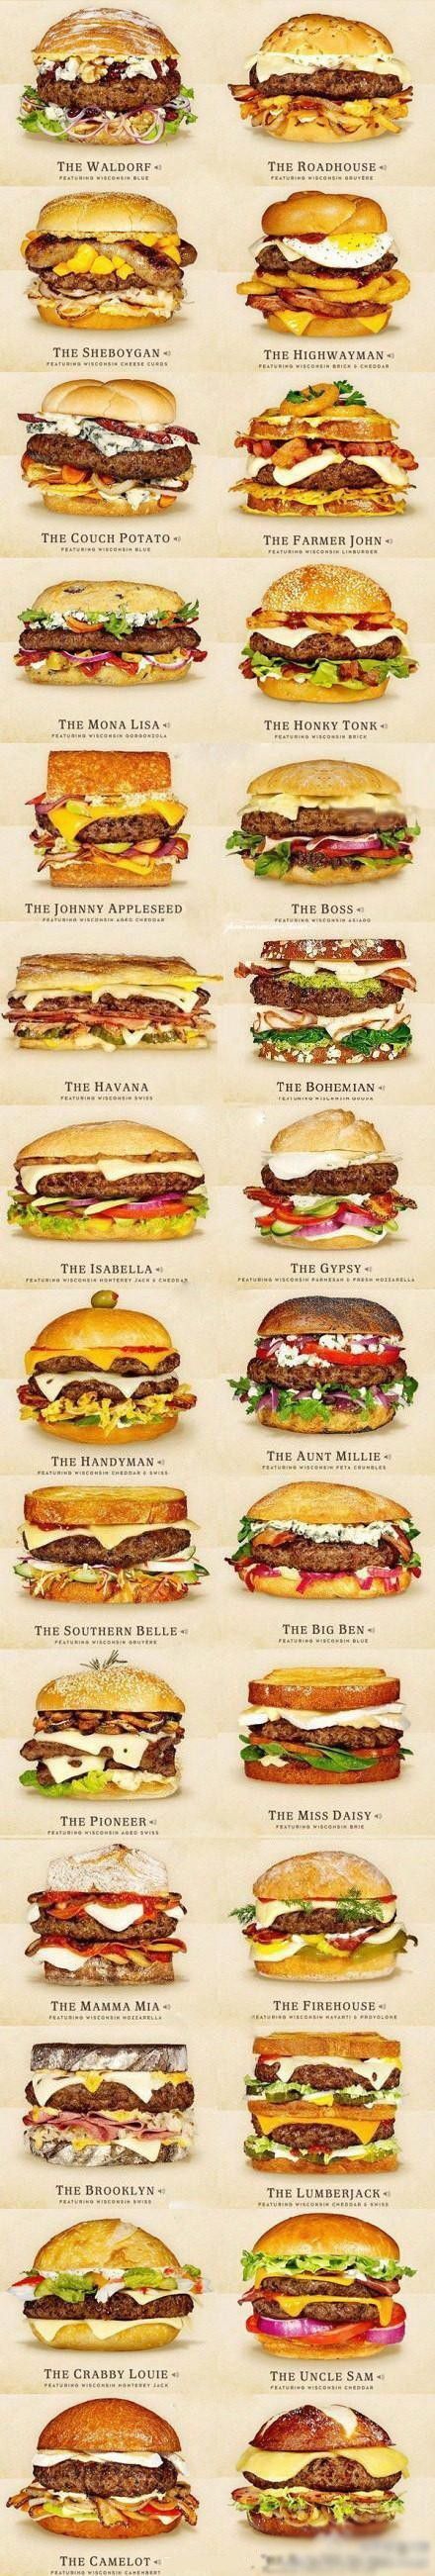 Cheeseburger ideas. I have hit the mother-load of all things holy.